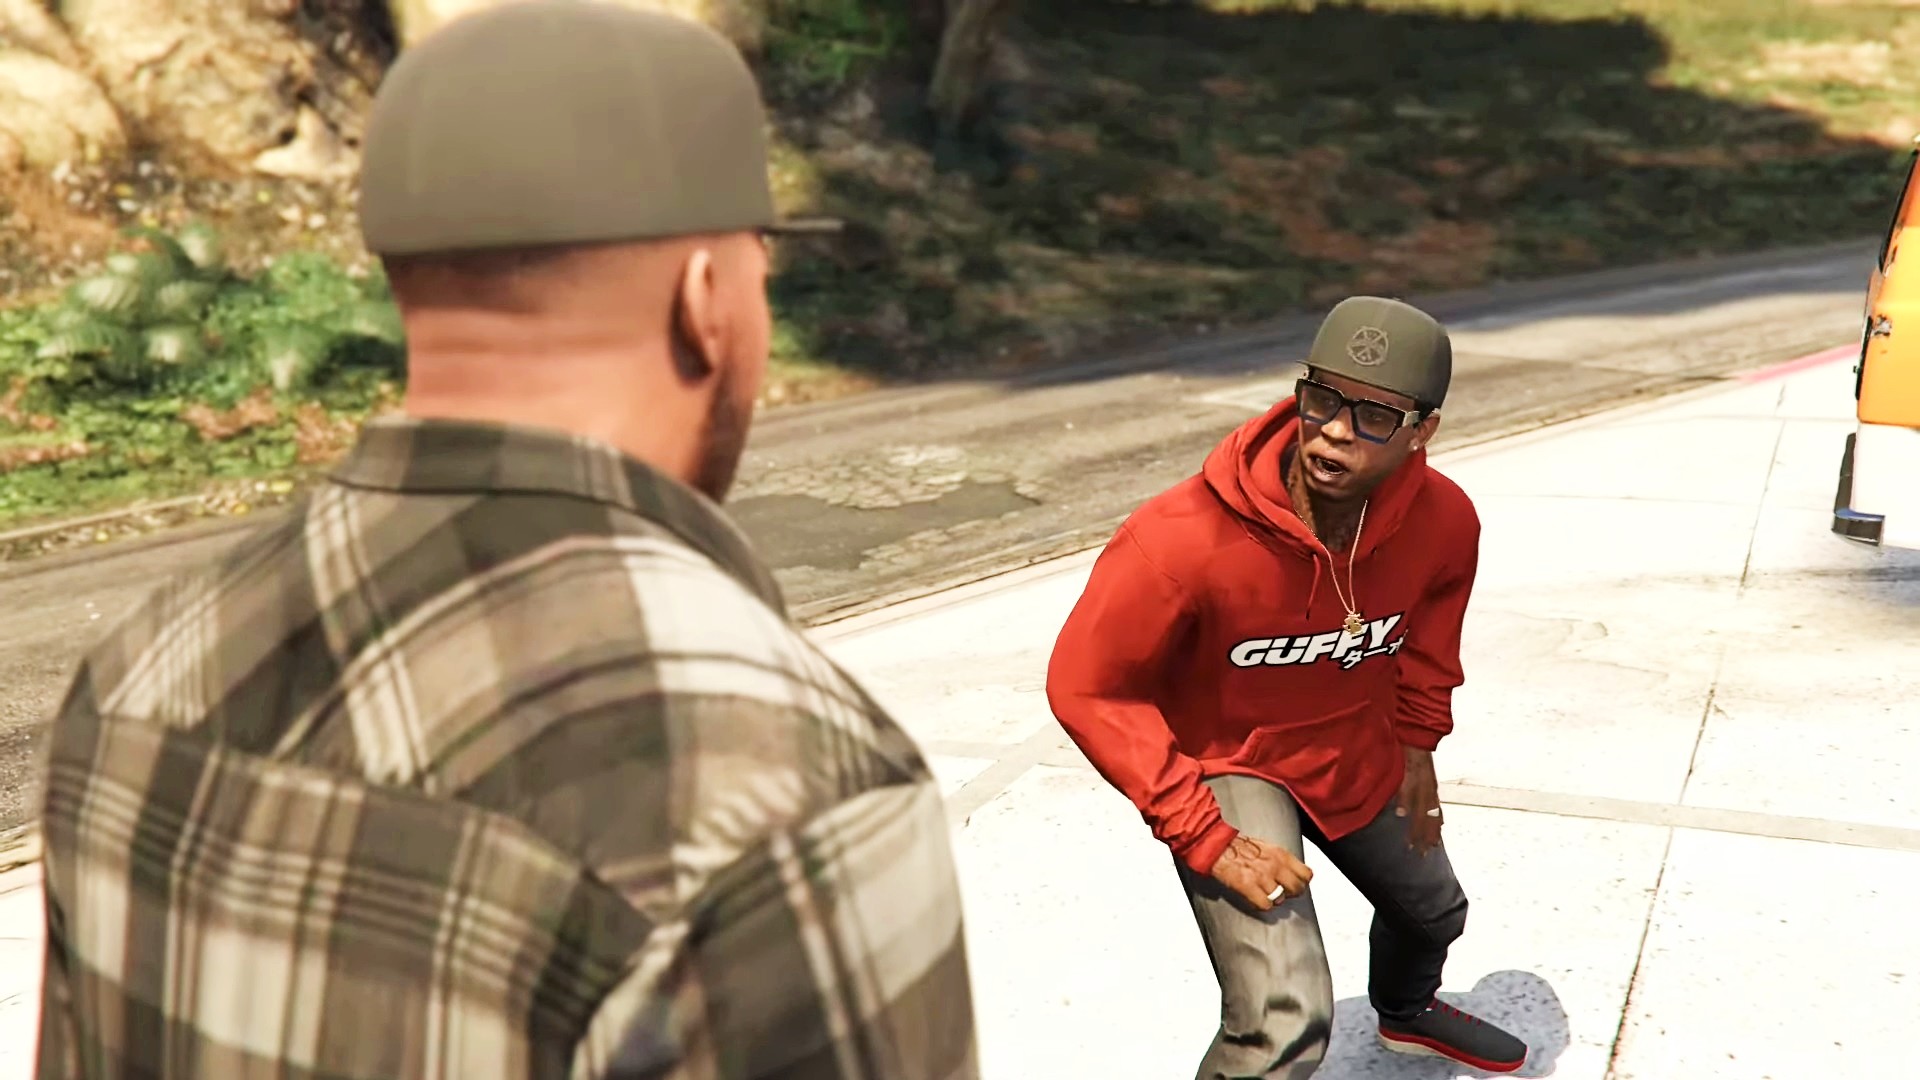 Lamar roasts Franklin again in GTA Online's The Contract update